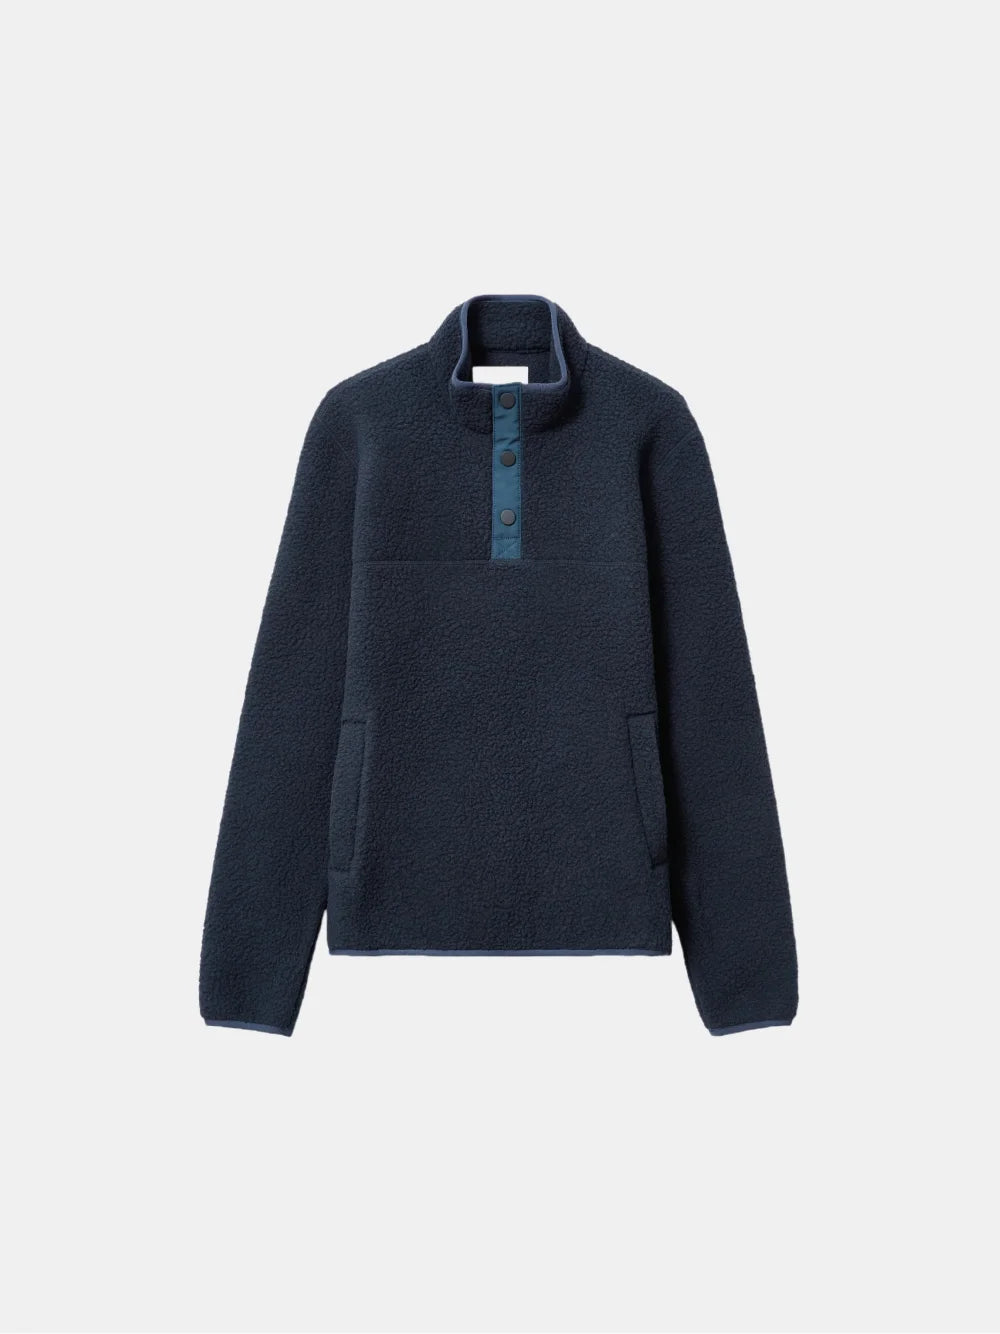 The Navy Pullover